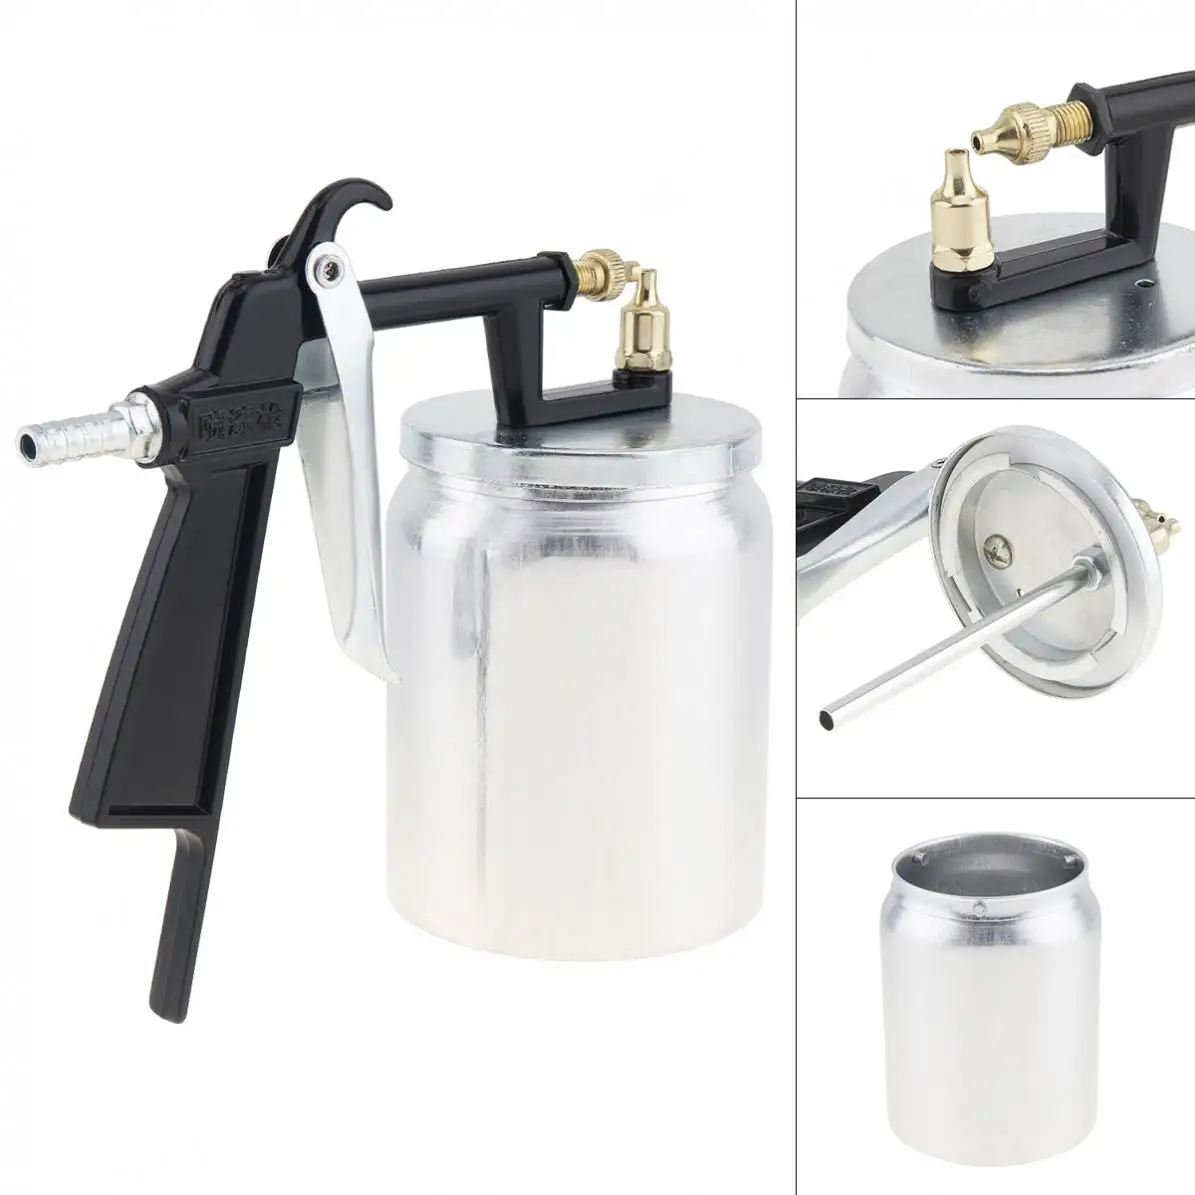 Spray Gun Mini Air Paint Spray Gun with 2.5mm Nozzle Caliber and Aluminum Pot for Furniture Leather Clothing Spray dragon diamond hs laser nozzle double layer chrome plated penta sonic nozzle d28 m11 caliber 1 2 1 6mm for fiber cutting head